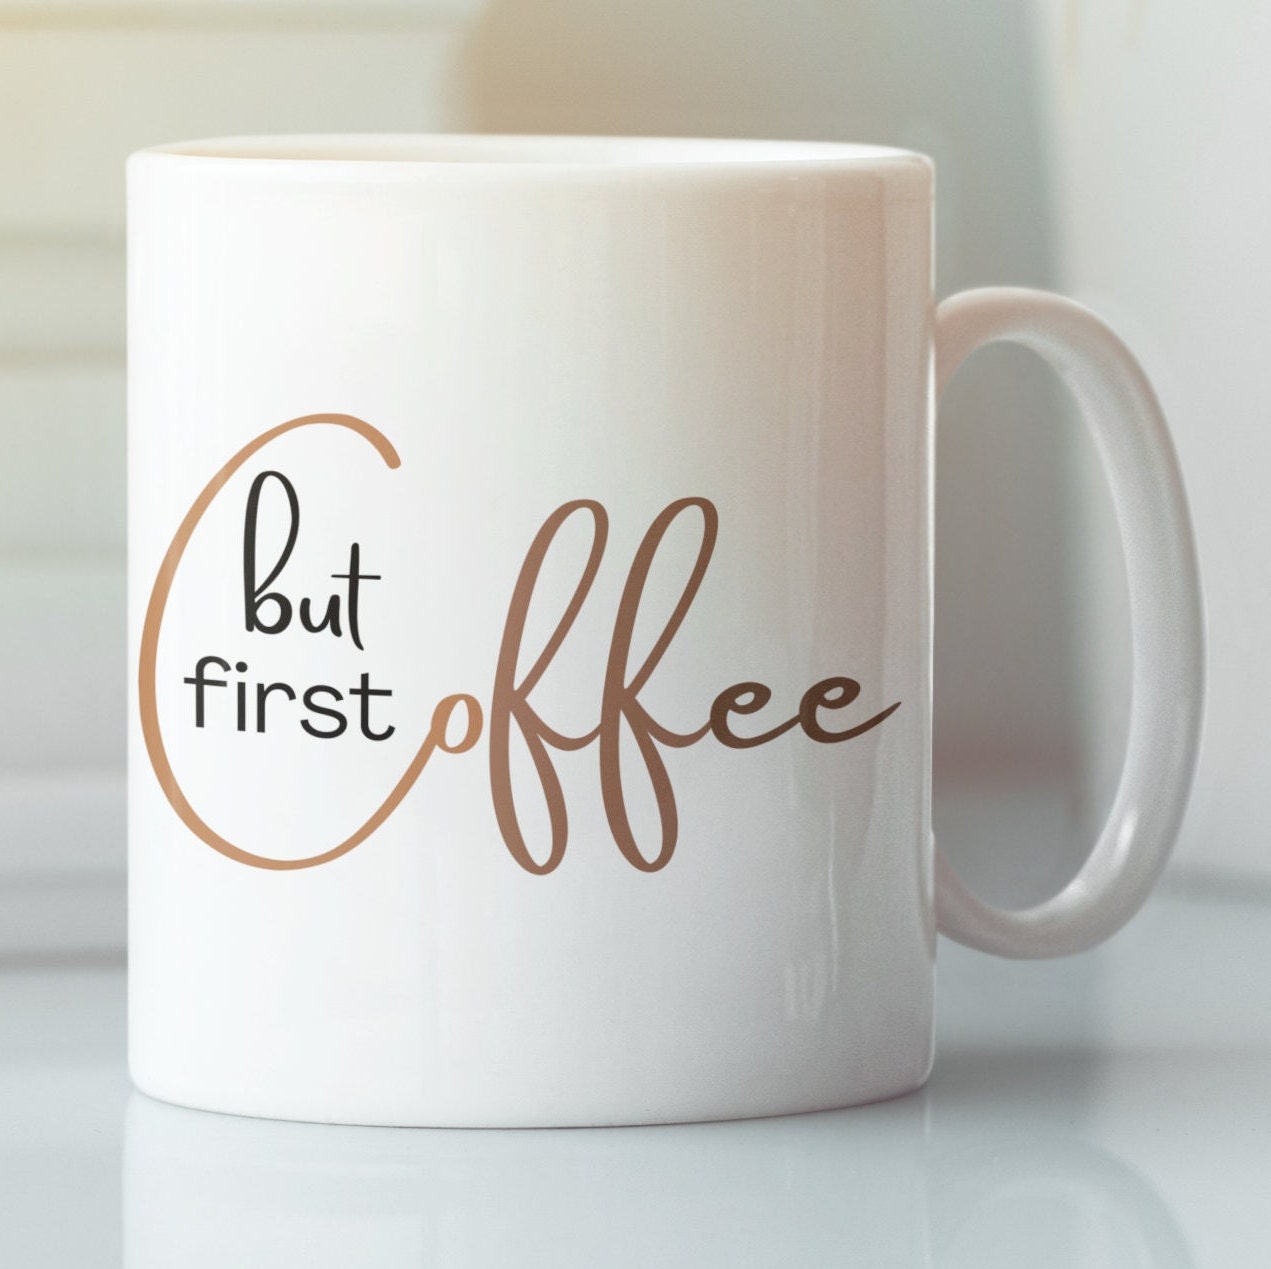 Ok But First Coffee 11 Ounces Ceramic Coffee Mug with Quotes, Funny Coffee  Mug with Sayings, Cool Co…See more Ok But First Coffee 11 Ounces Ceramic